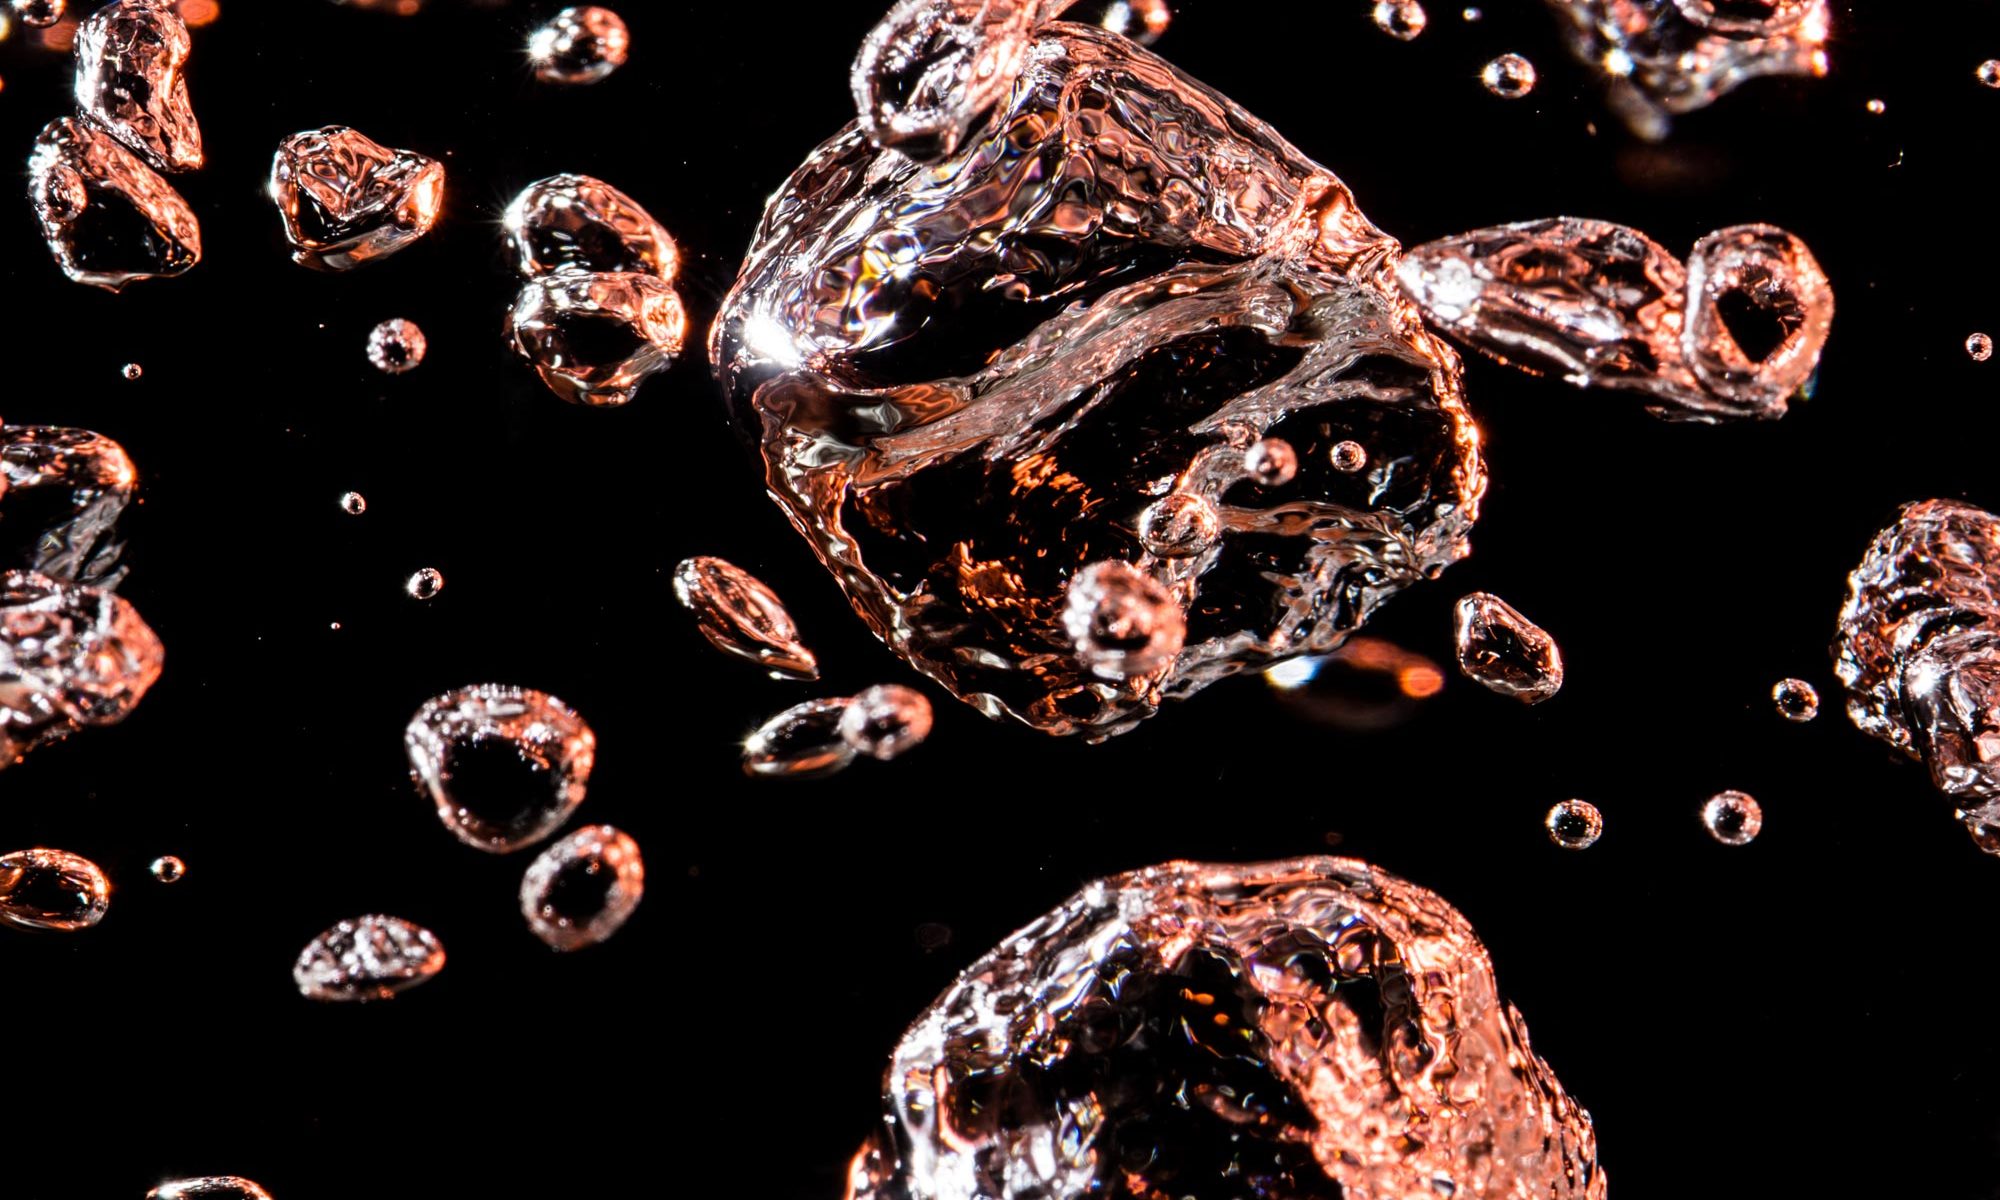 photographing boiling water